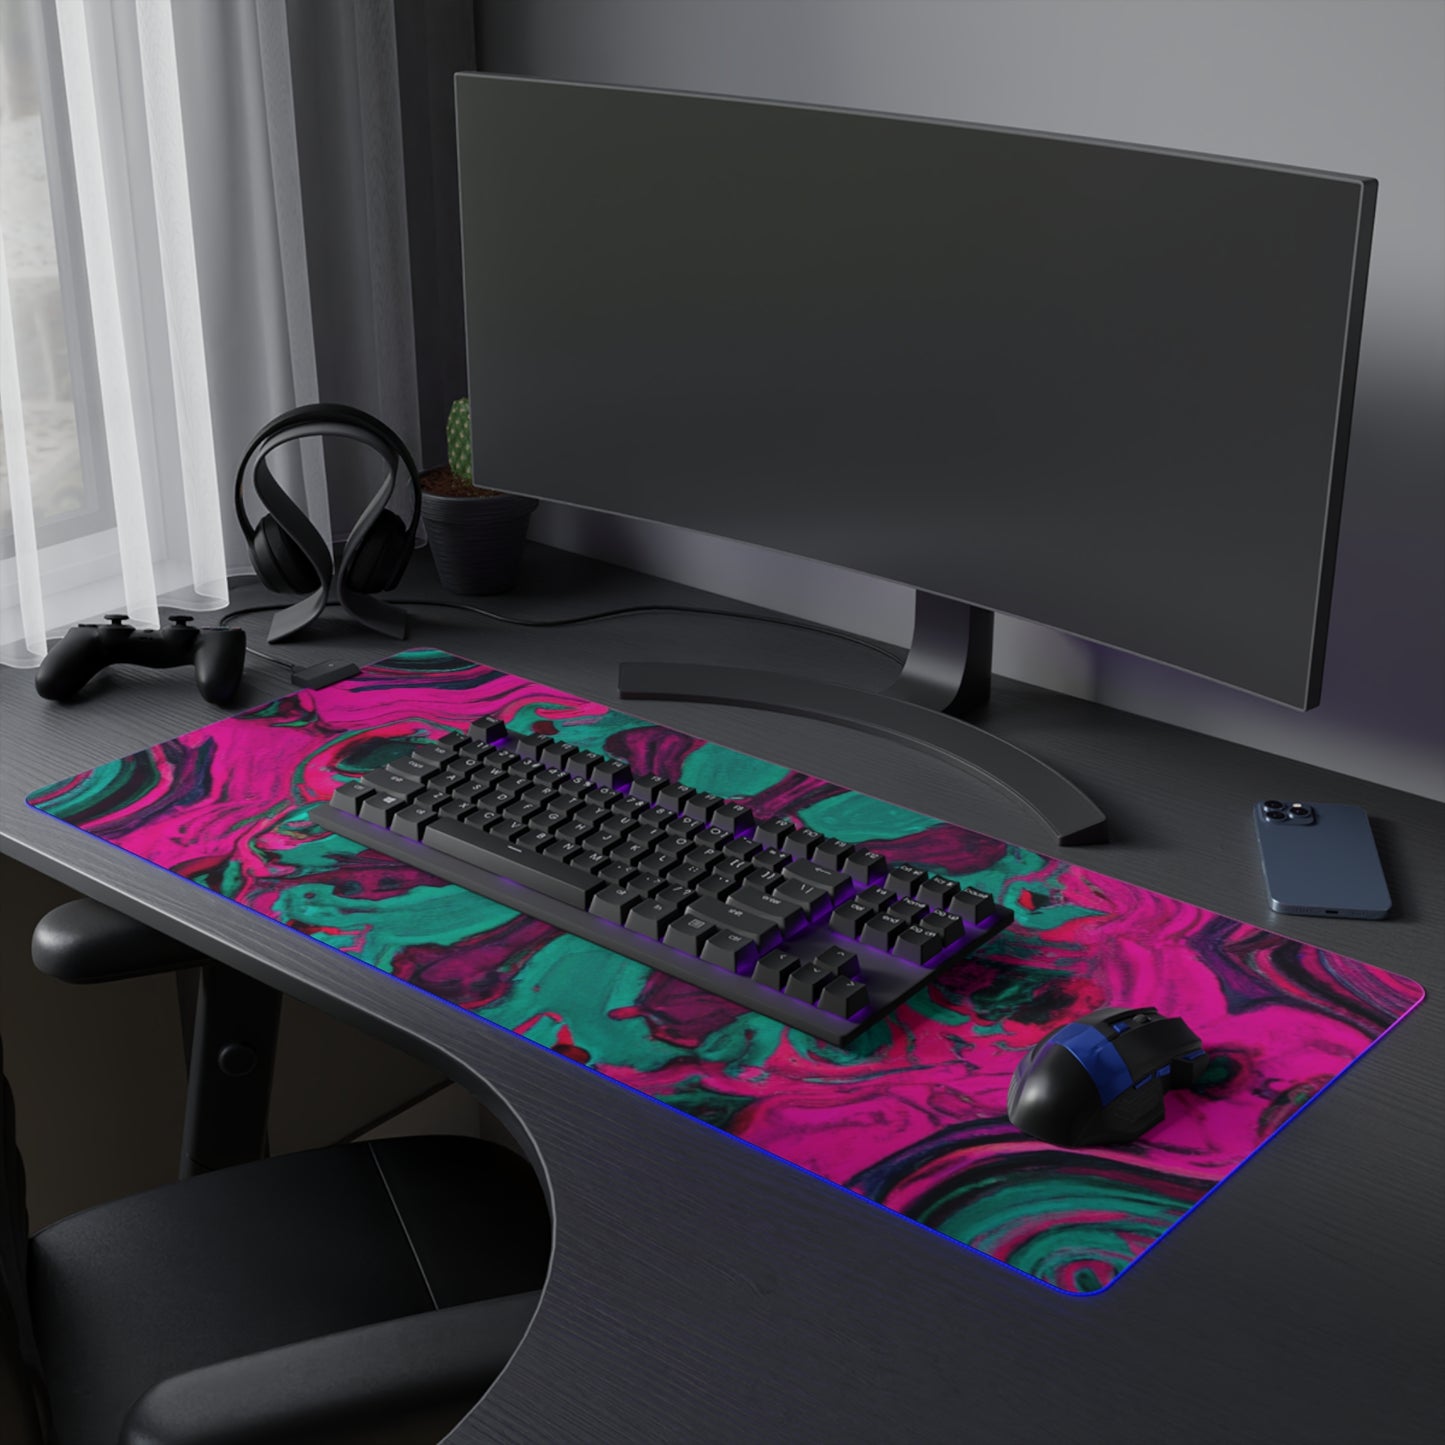 Bopper Buzzsaw - Psychedelic Trippy LED Light Up Gaming Mouse Pad